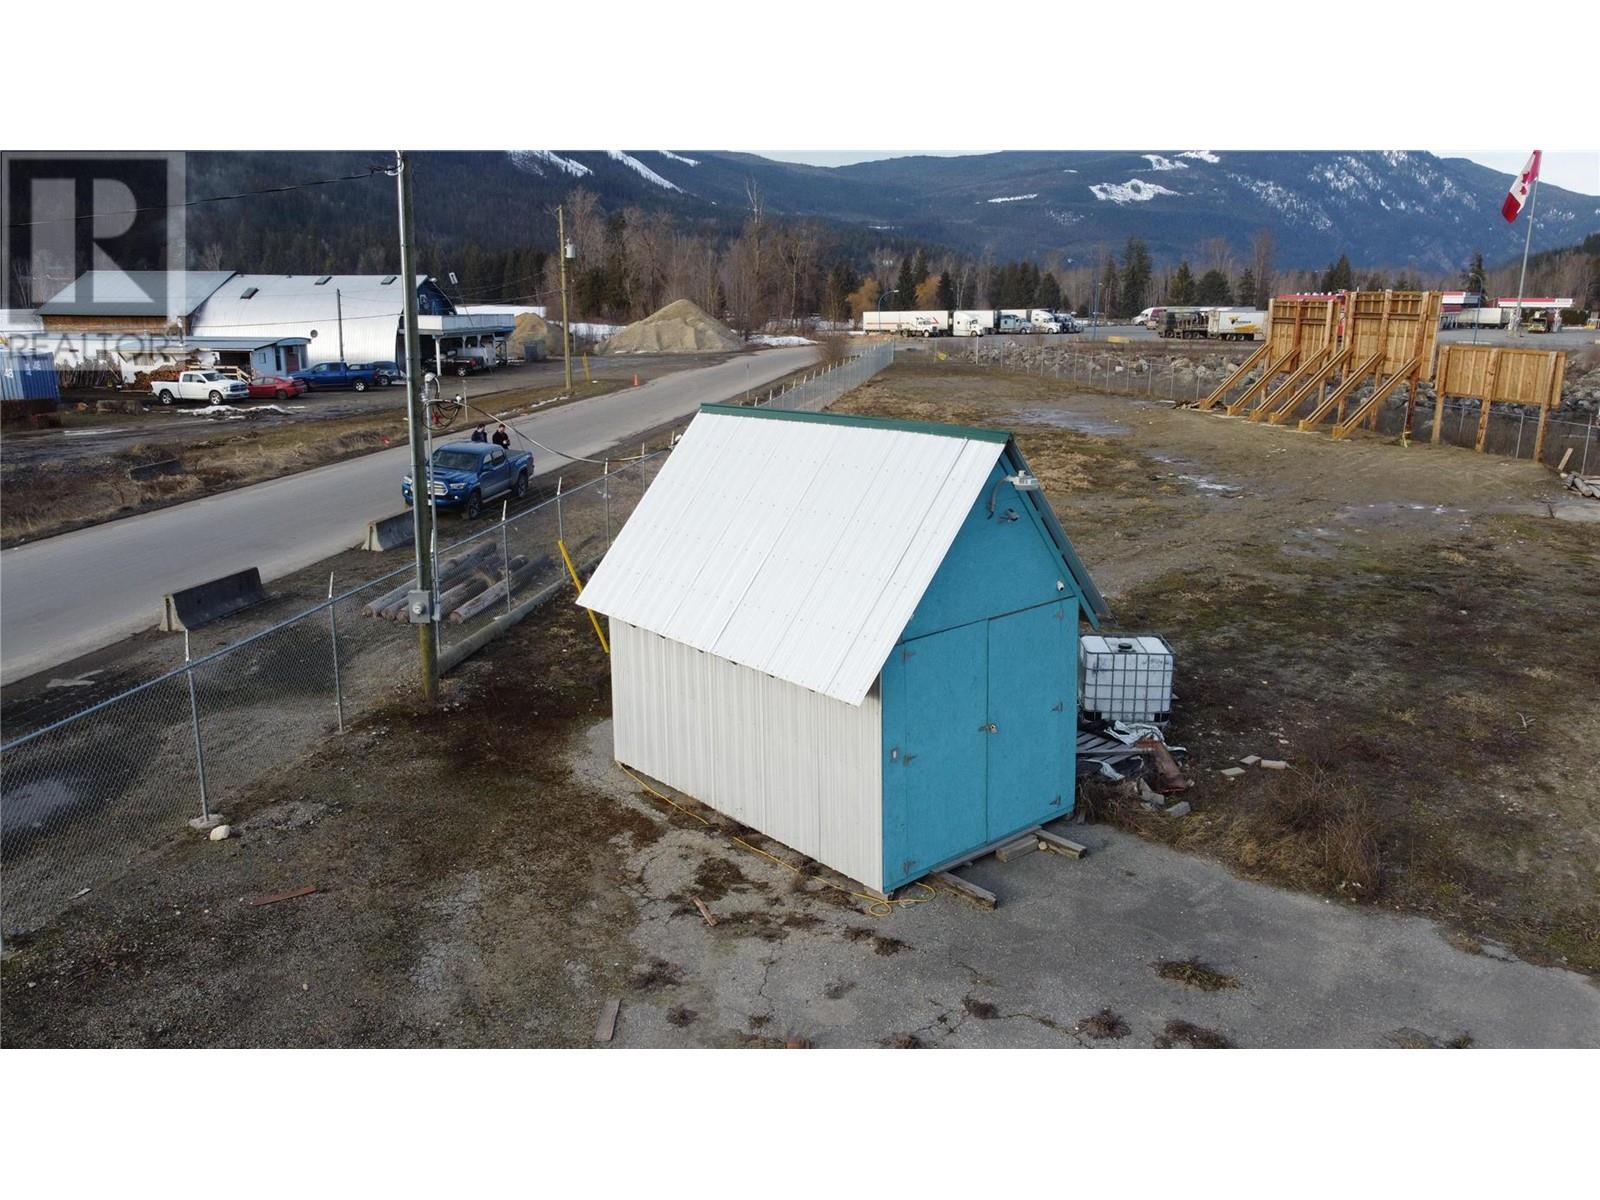  1310 Trans Canada Highway, Sicamous